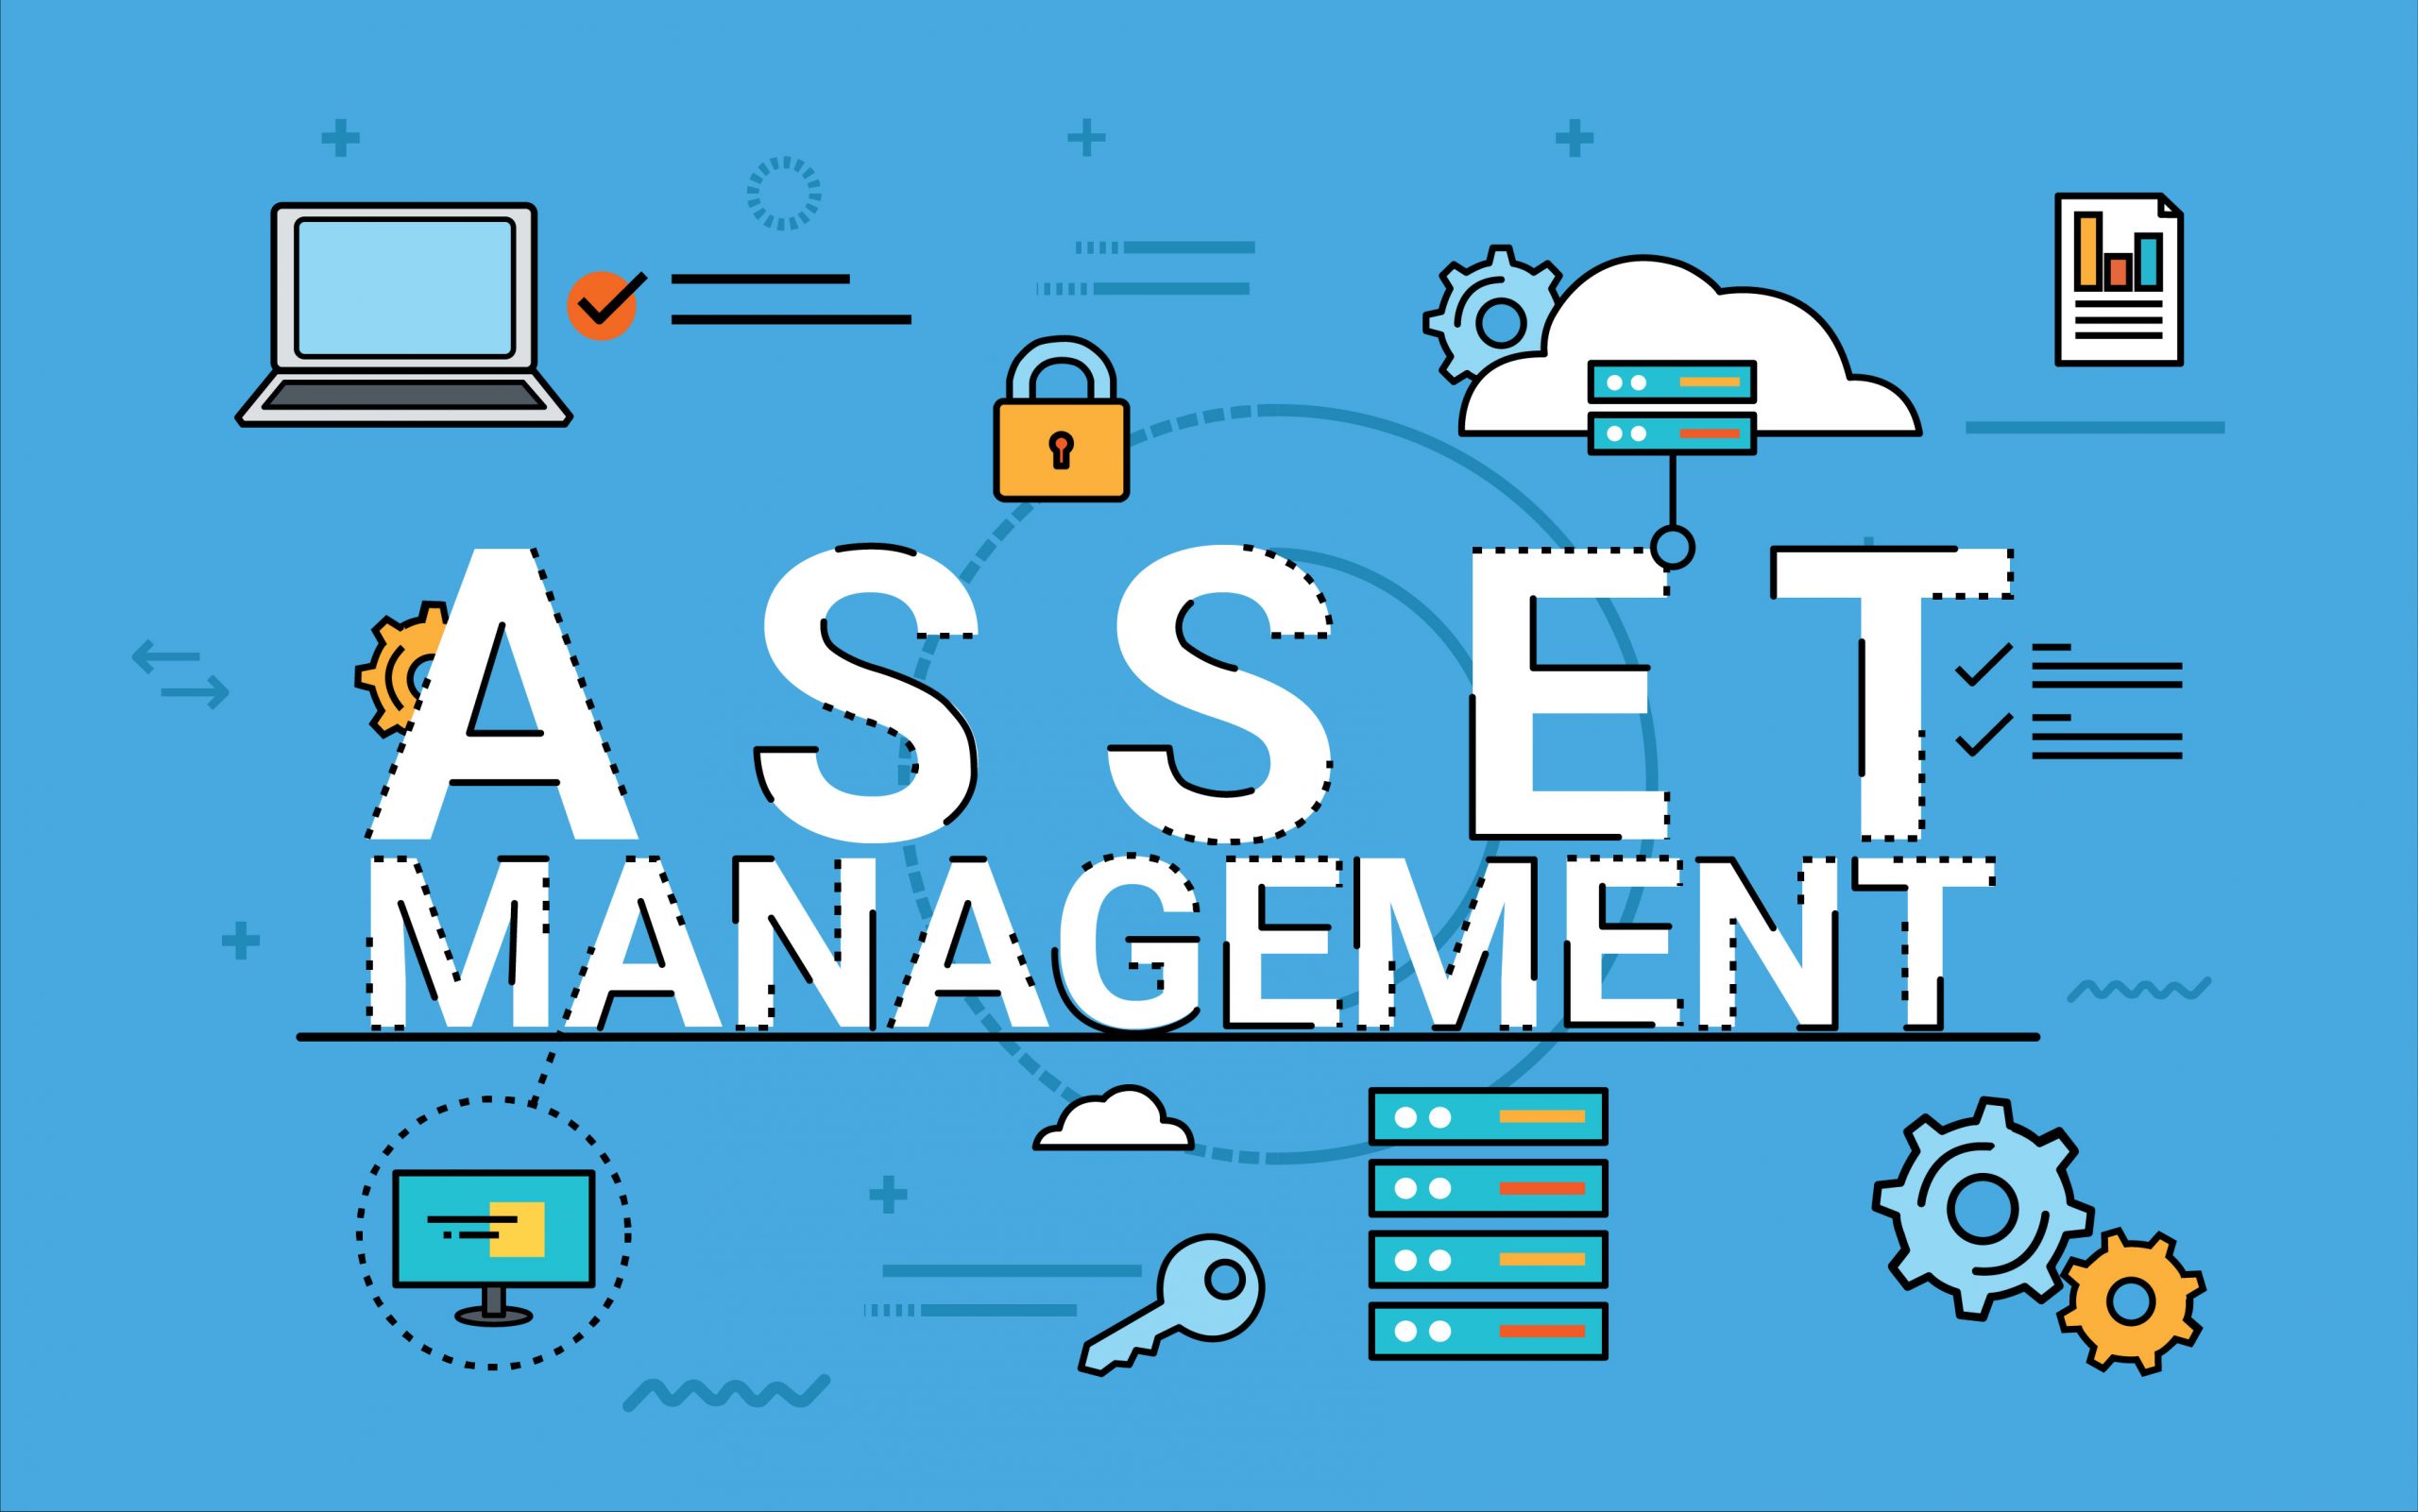 The Quick Guide to Your Asset Management System